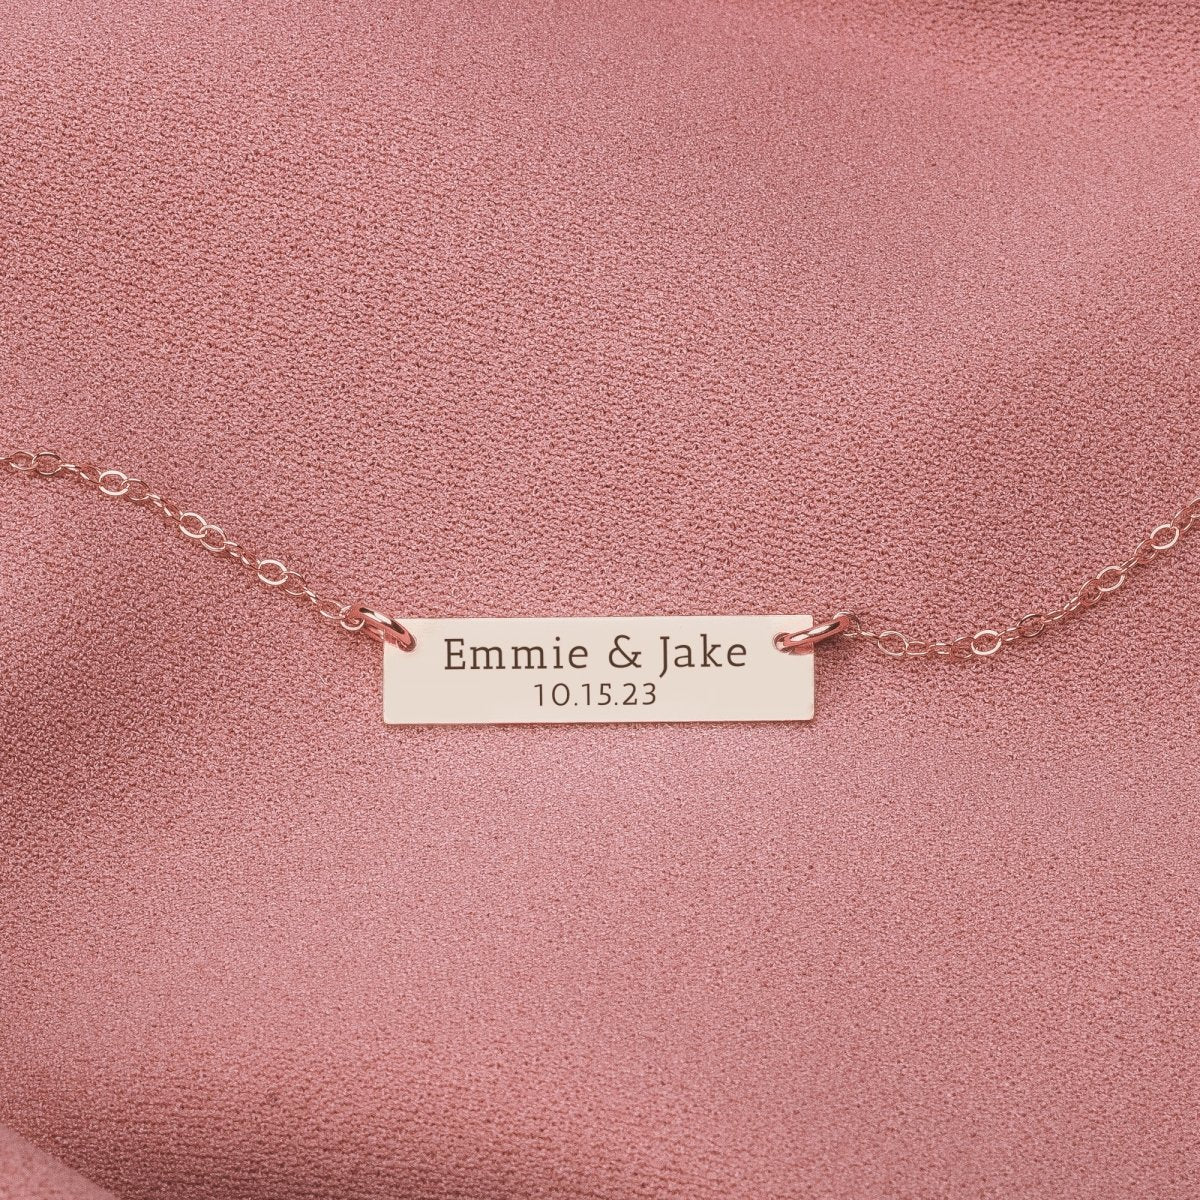 Personalized Couples Bar Necklace - Melanie Golden Jewelry - bar necklaces, bridesmaid, Engraved Jewelry, love, necklace, personalized, personalized necklace, VALENTINES, wedding, wedding party